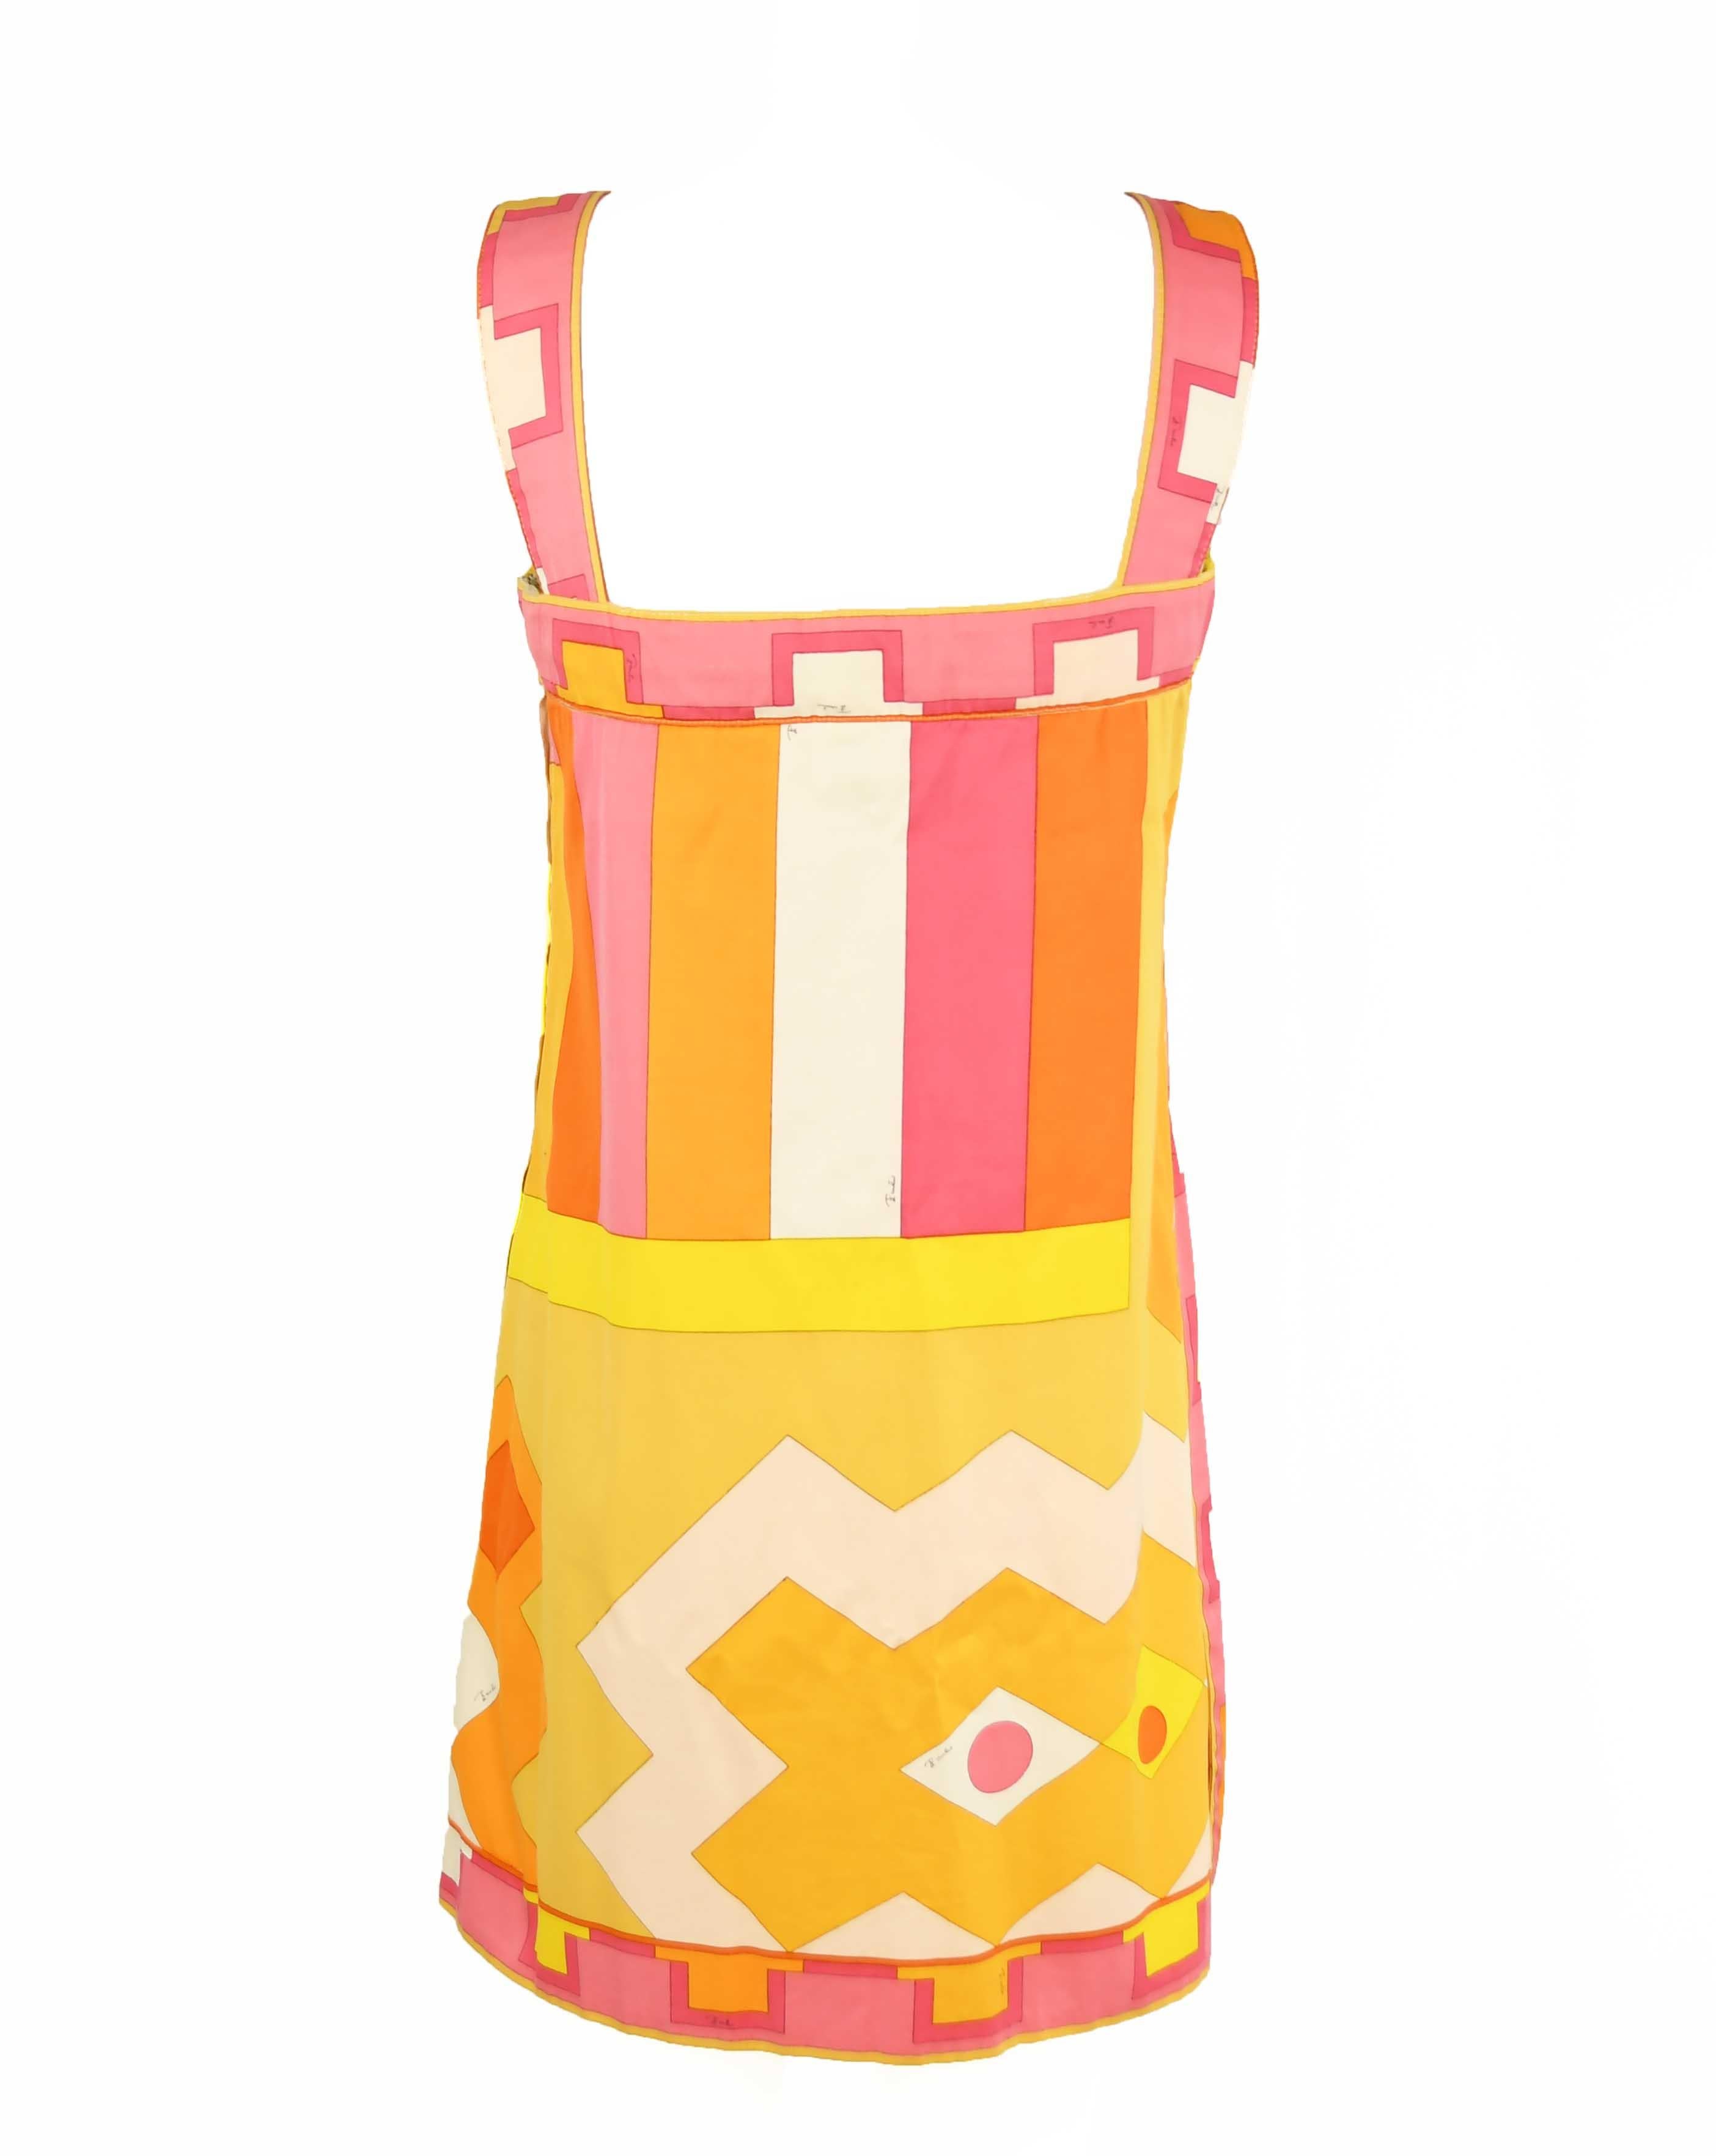 Classic vintage Pucci print in bright and vibrant yellow, pinks and orange.  Made of a twill fabric with an a-line silhouette. Perfect dress to throw on for summer.

Size: Labeled a vintage size 10, which fits approximately a modern size